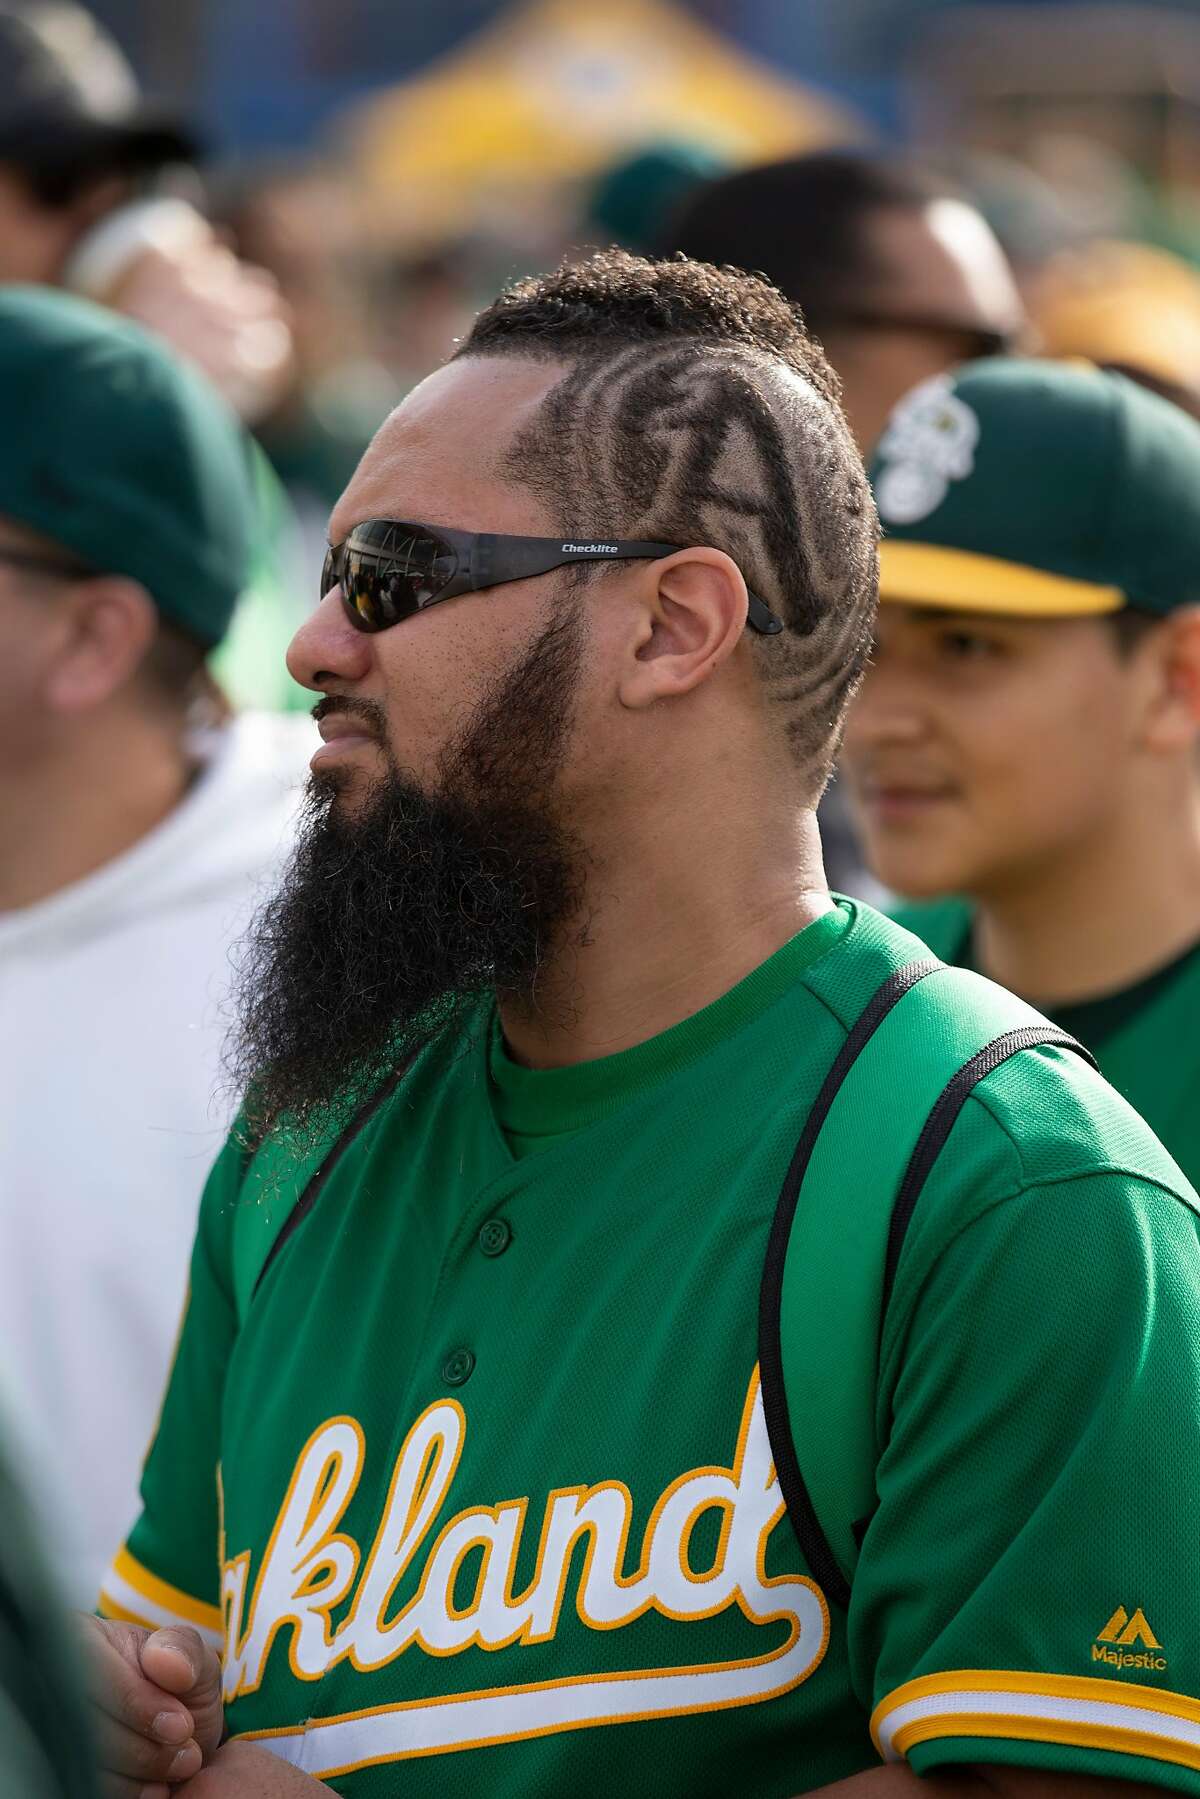 Andre Arroyo of San Leandro, Calif. shows his A's devotion with a unique hairstyle, at Oakland Athletics FanFest 2019, at Jack London Square in Oakland, Calif., Saturday, Jan. 26, 2019. A's supporters arrived by the thousands to see their favorite players, coaches and former stars as the club prepares for the new baseball season.